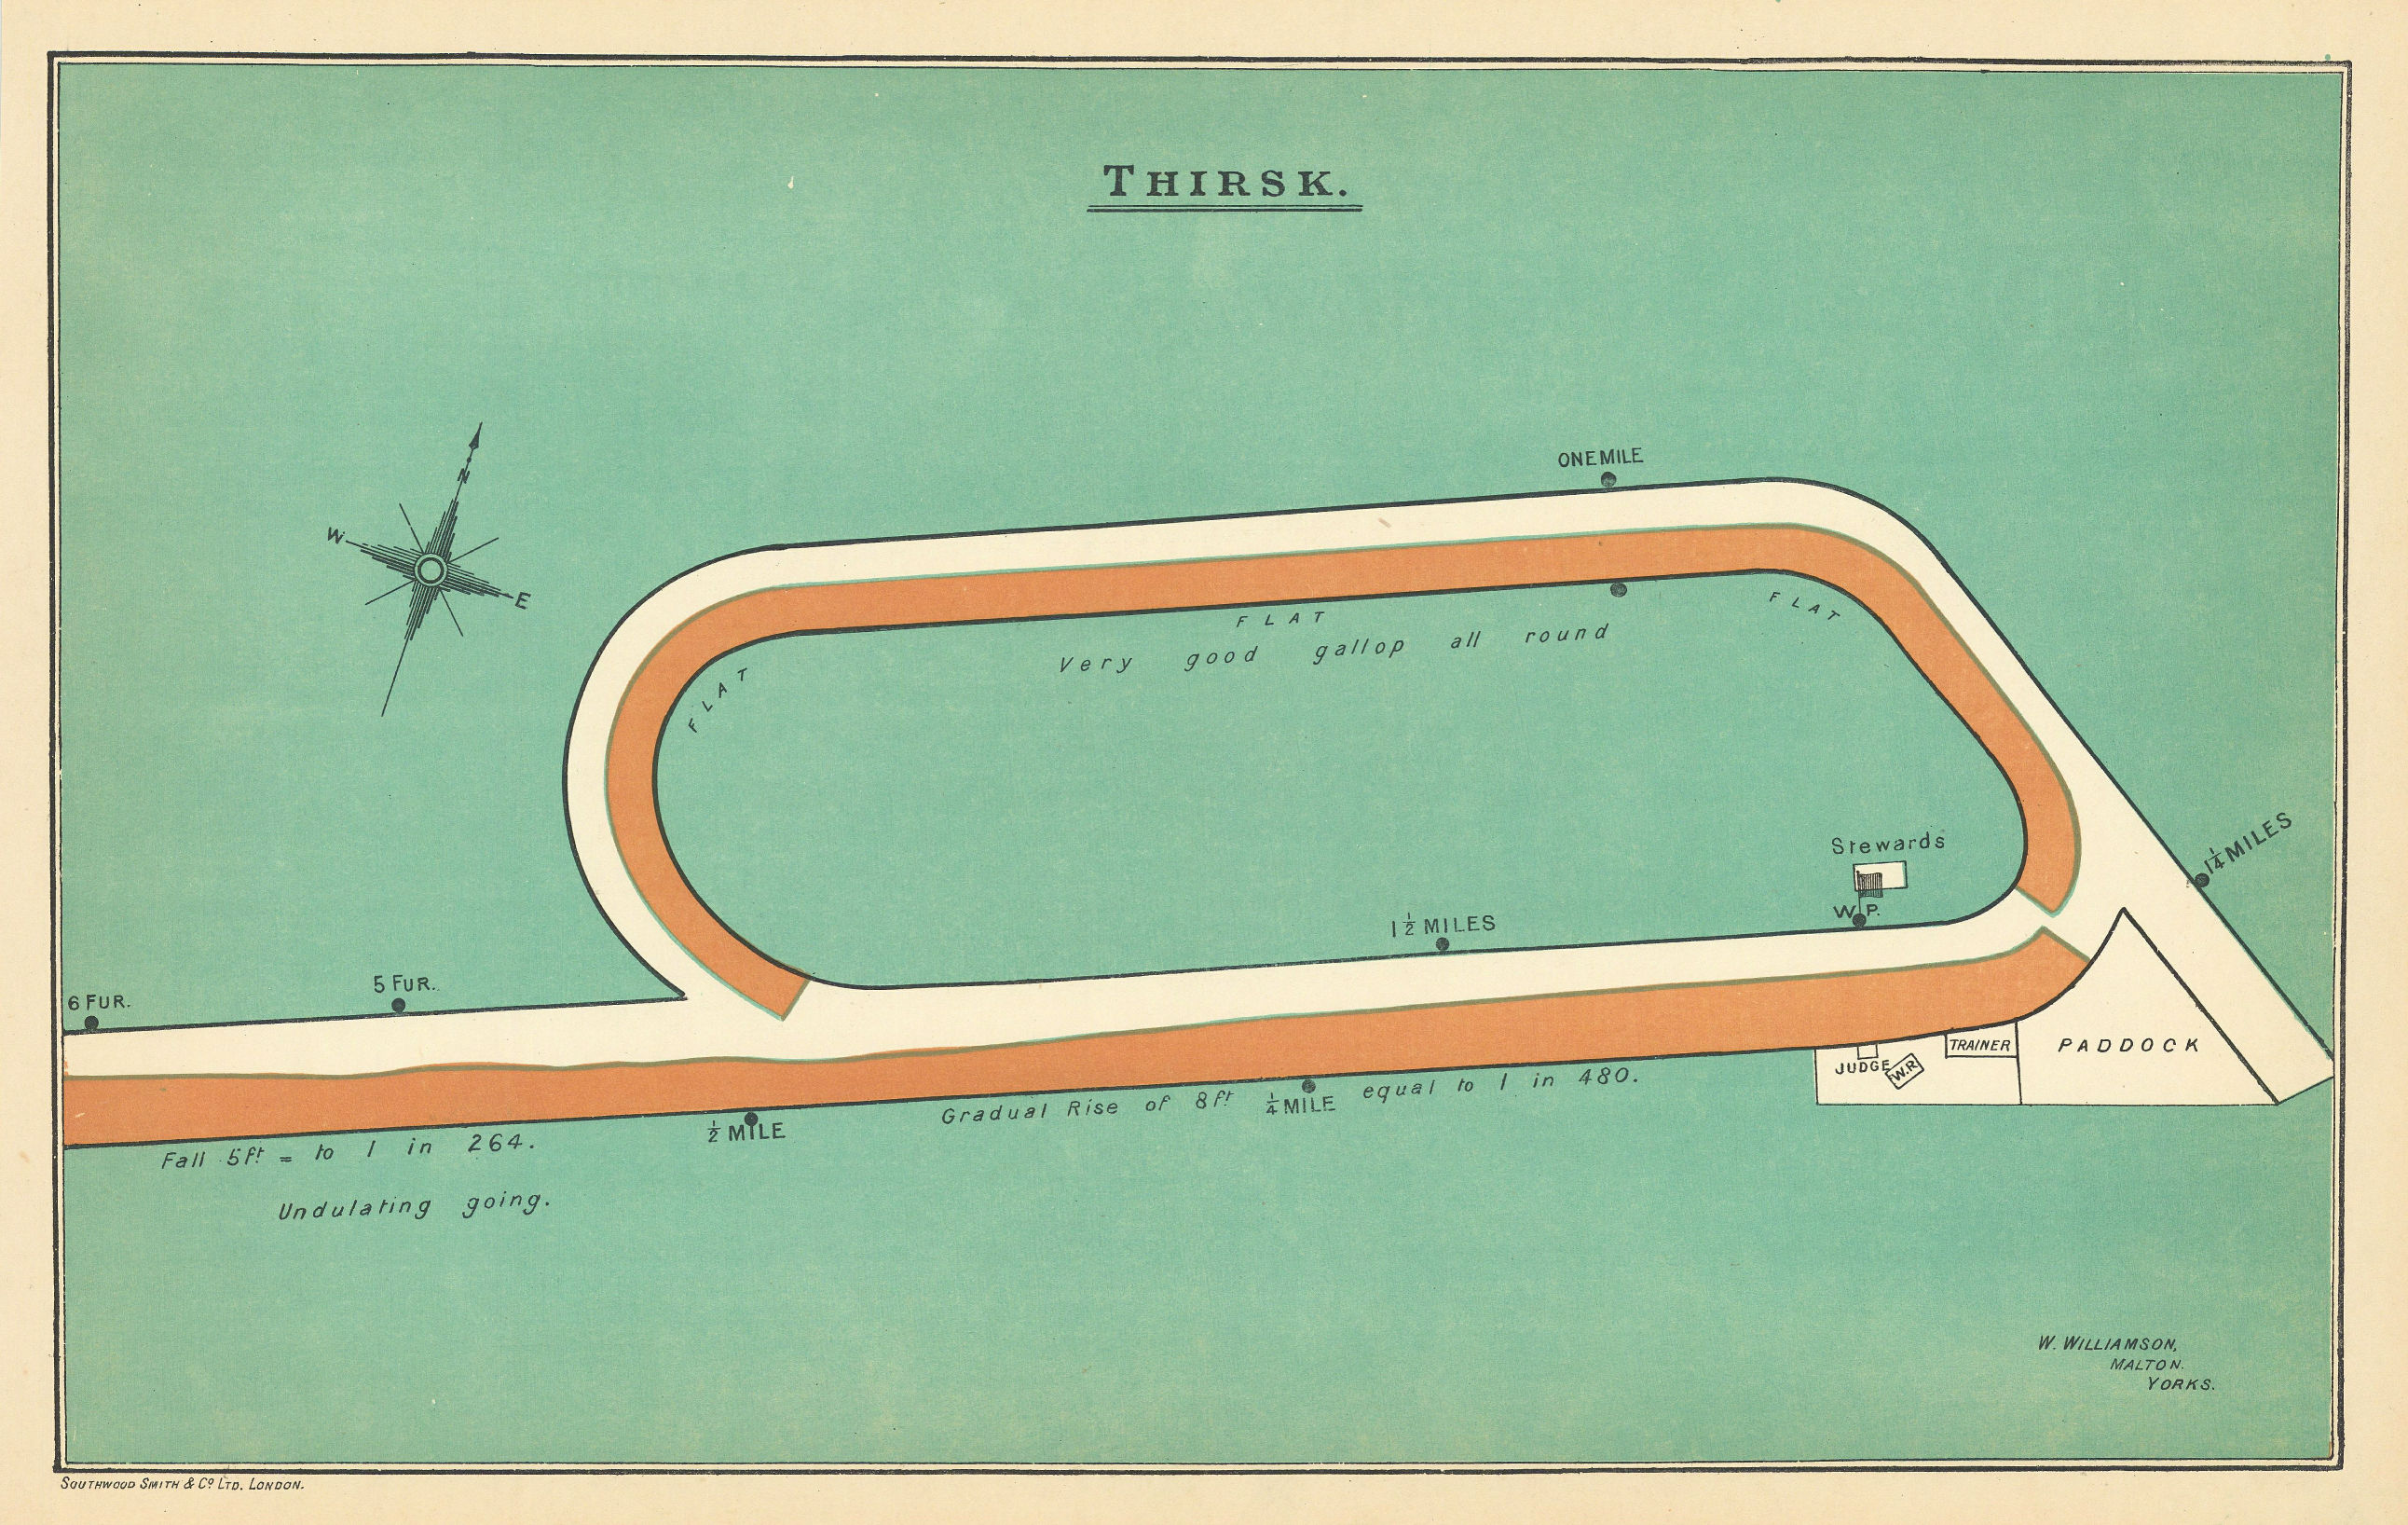 Associate Product Thirsk racecourse, Yorkshire. BAYLES 1903 old antique vintage map plan chart